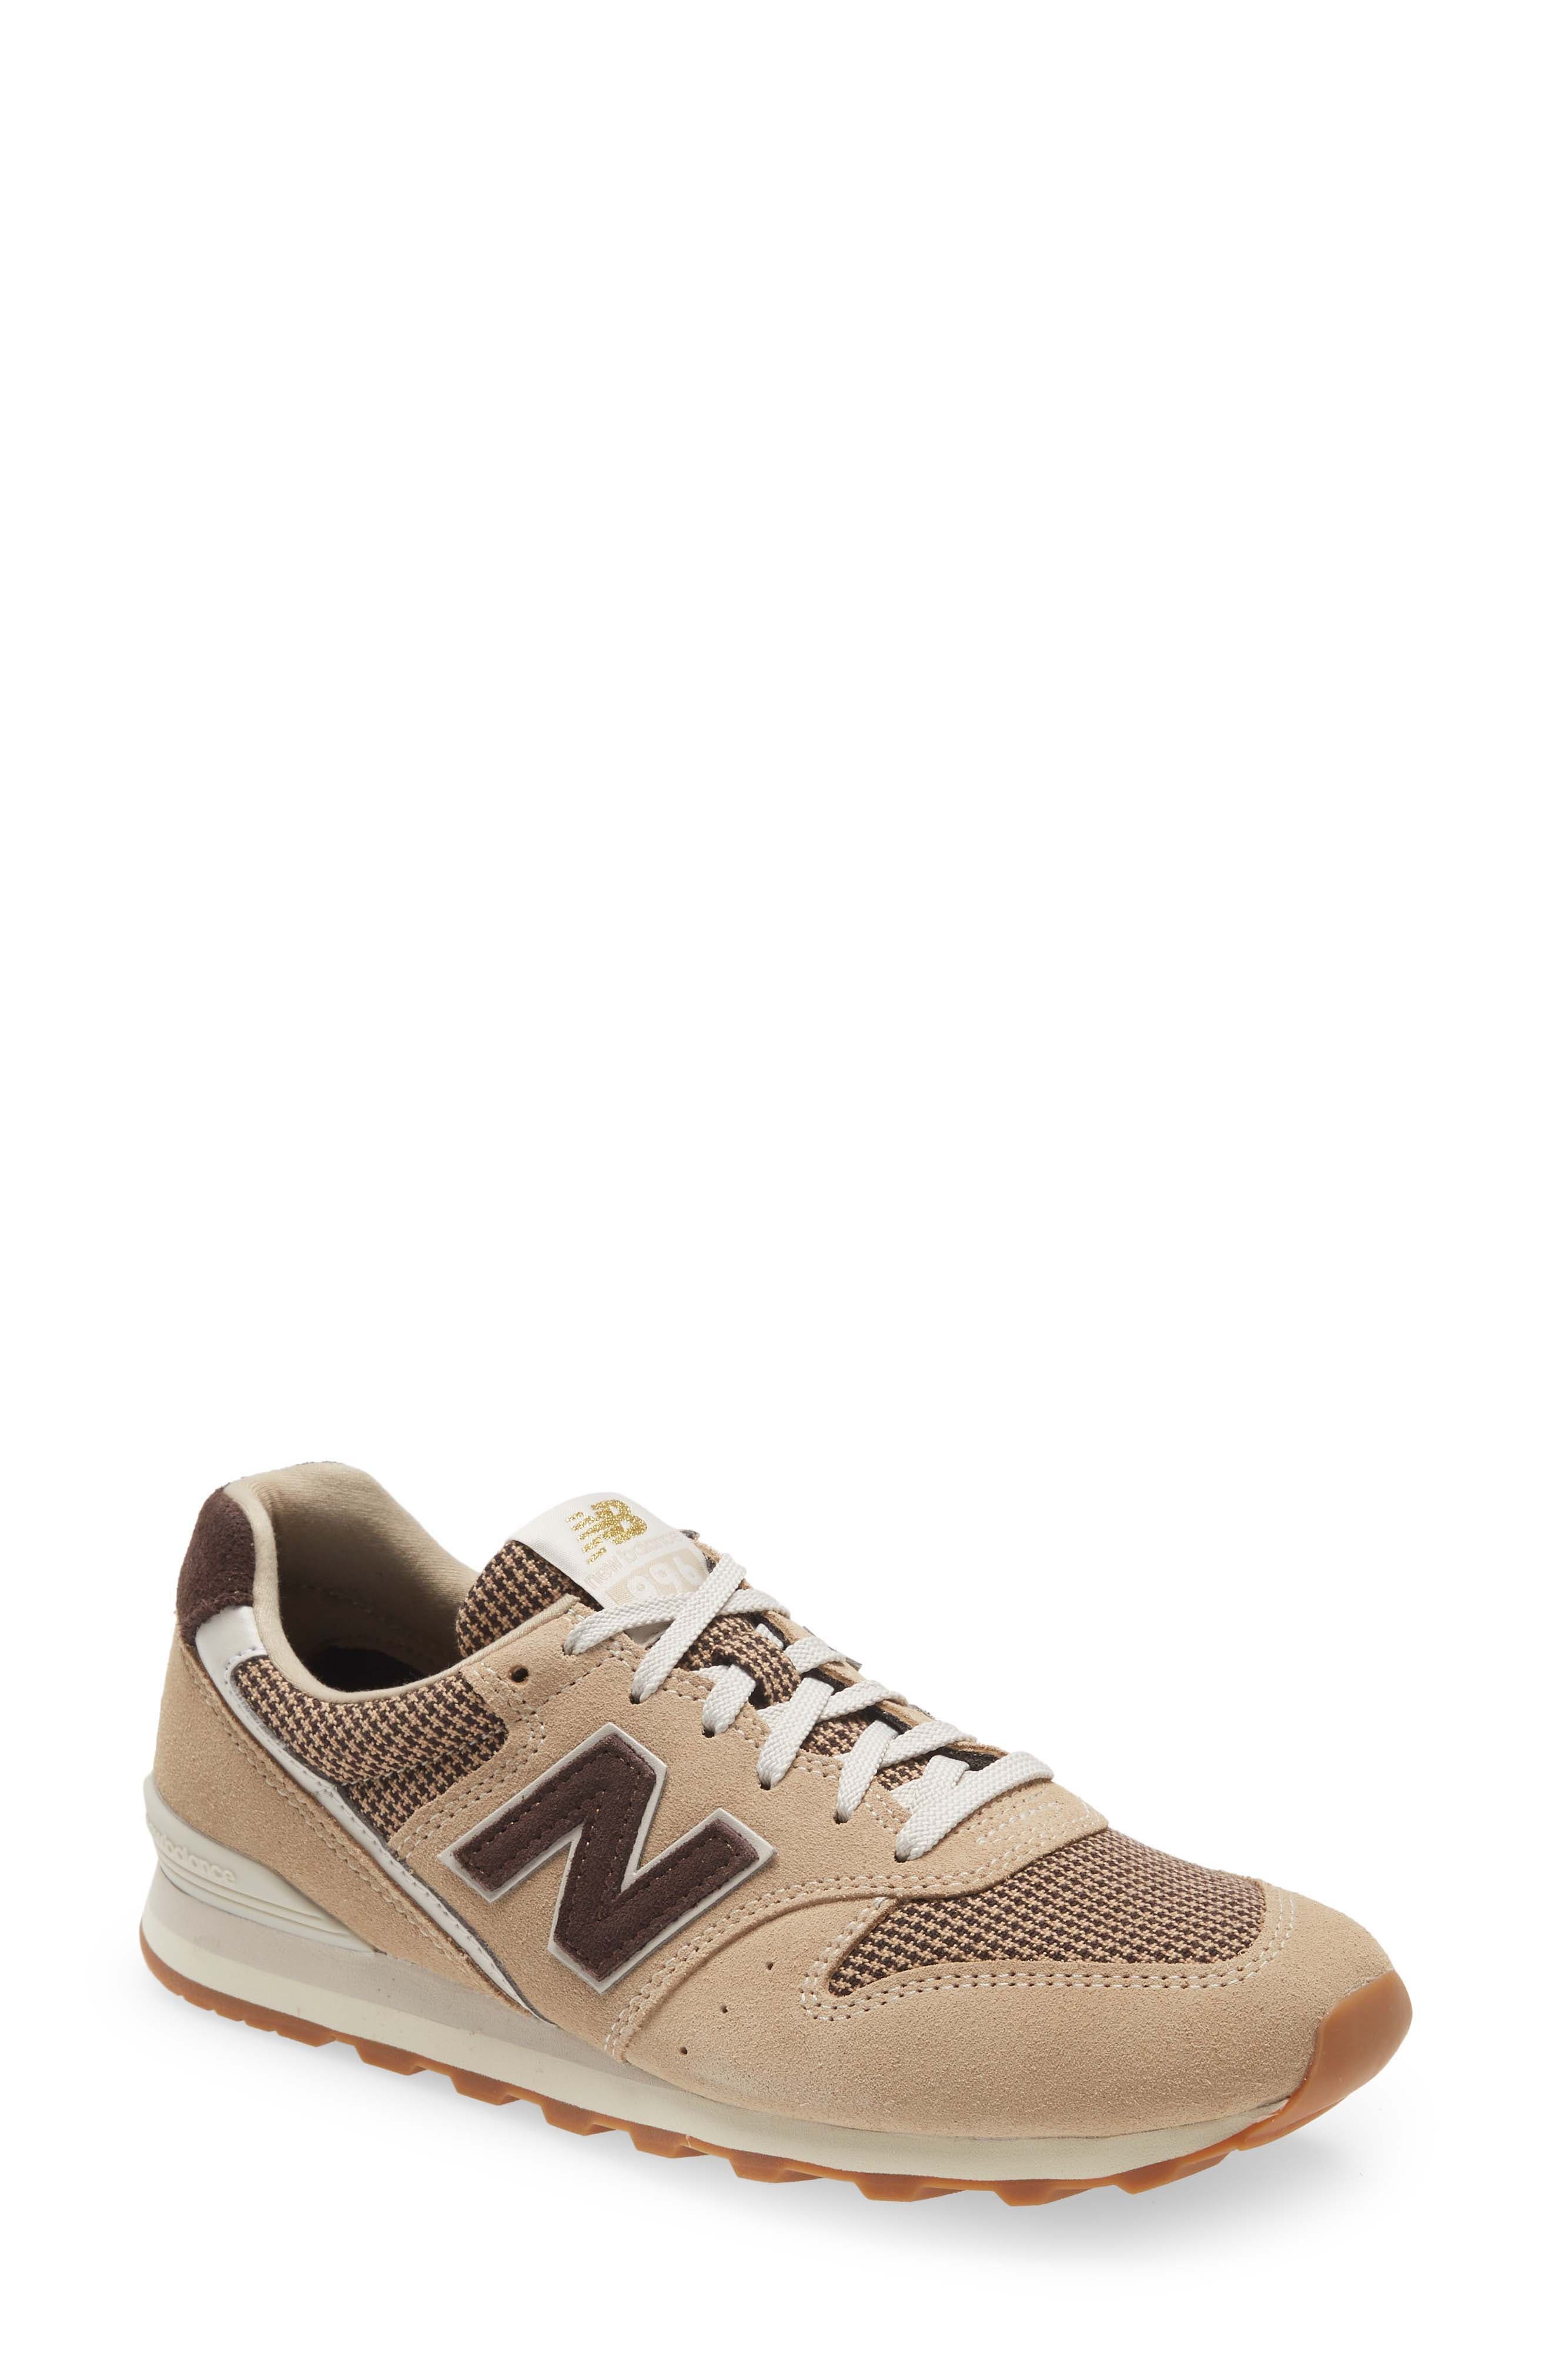 Women's New Balance Shoes | Nordstrom